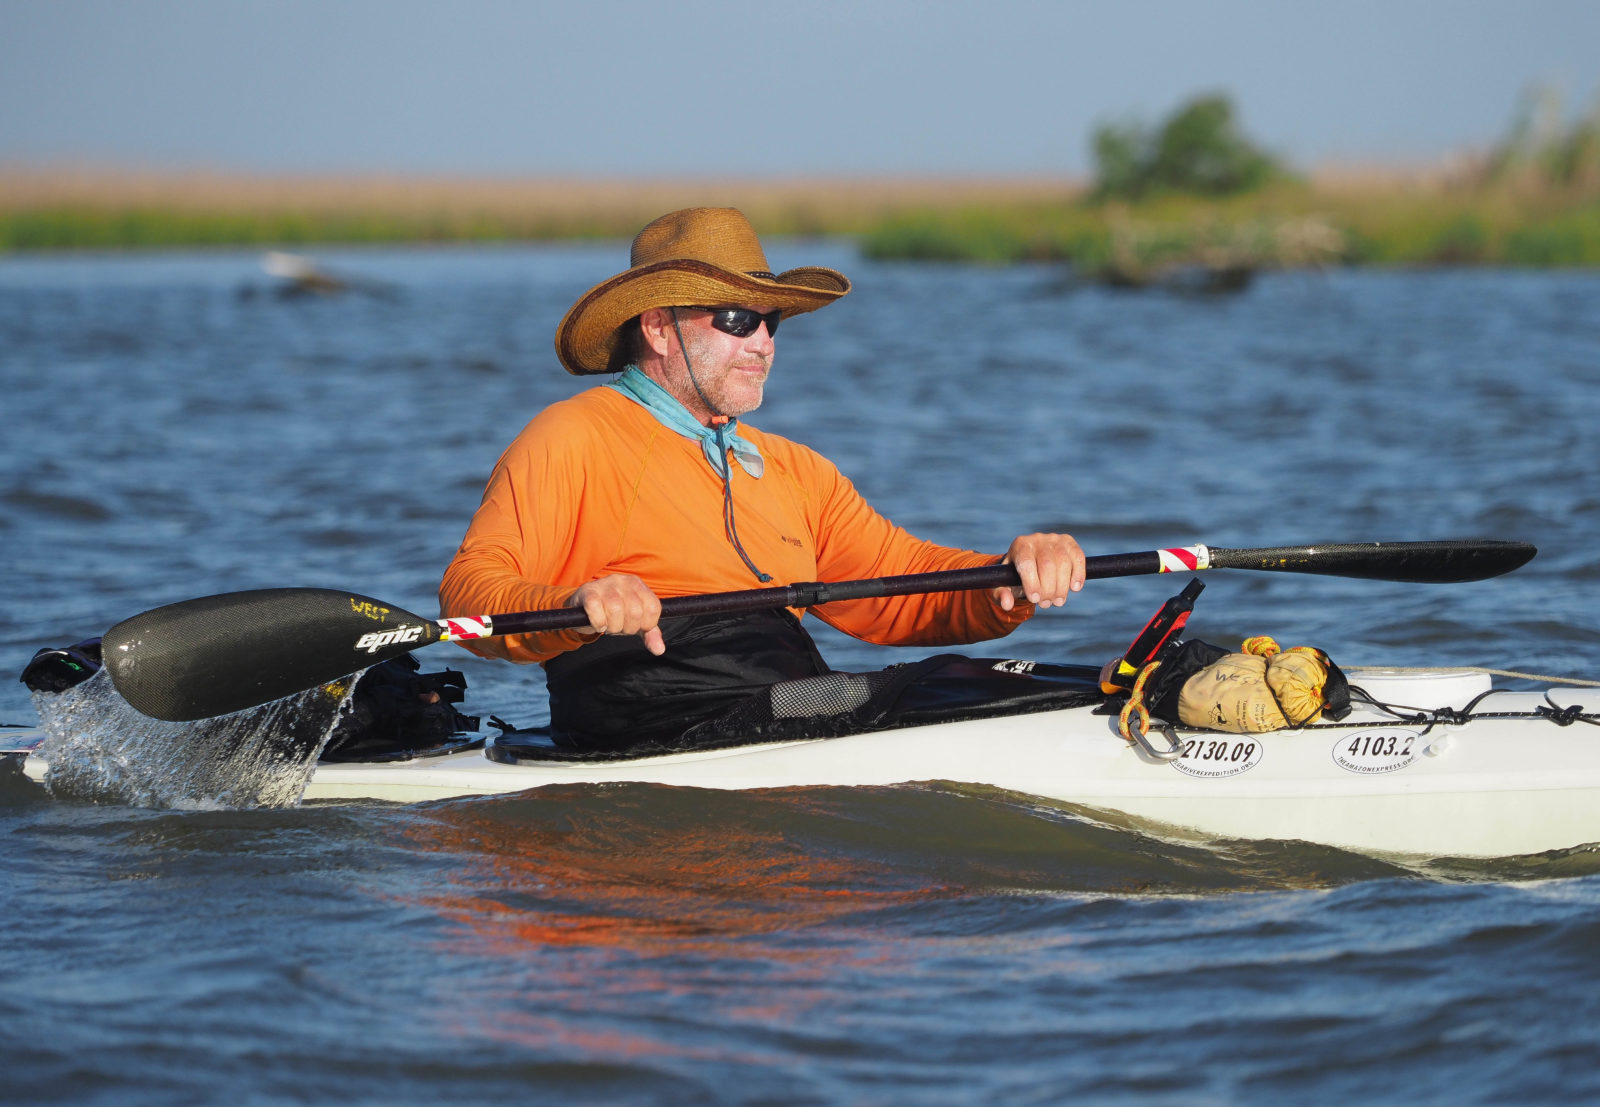 West Hansen paddles the Texas coast in 2020